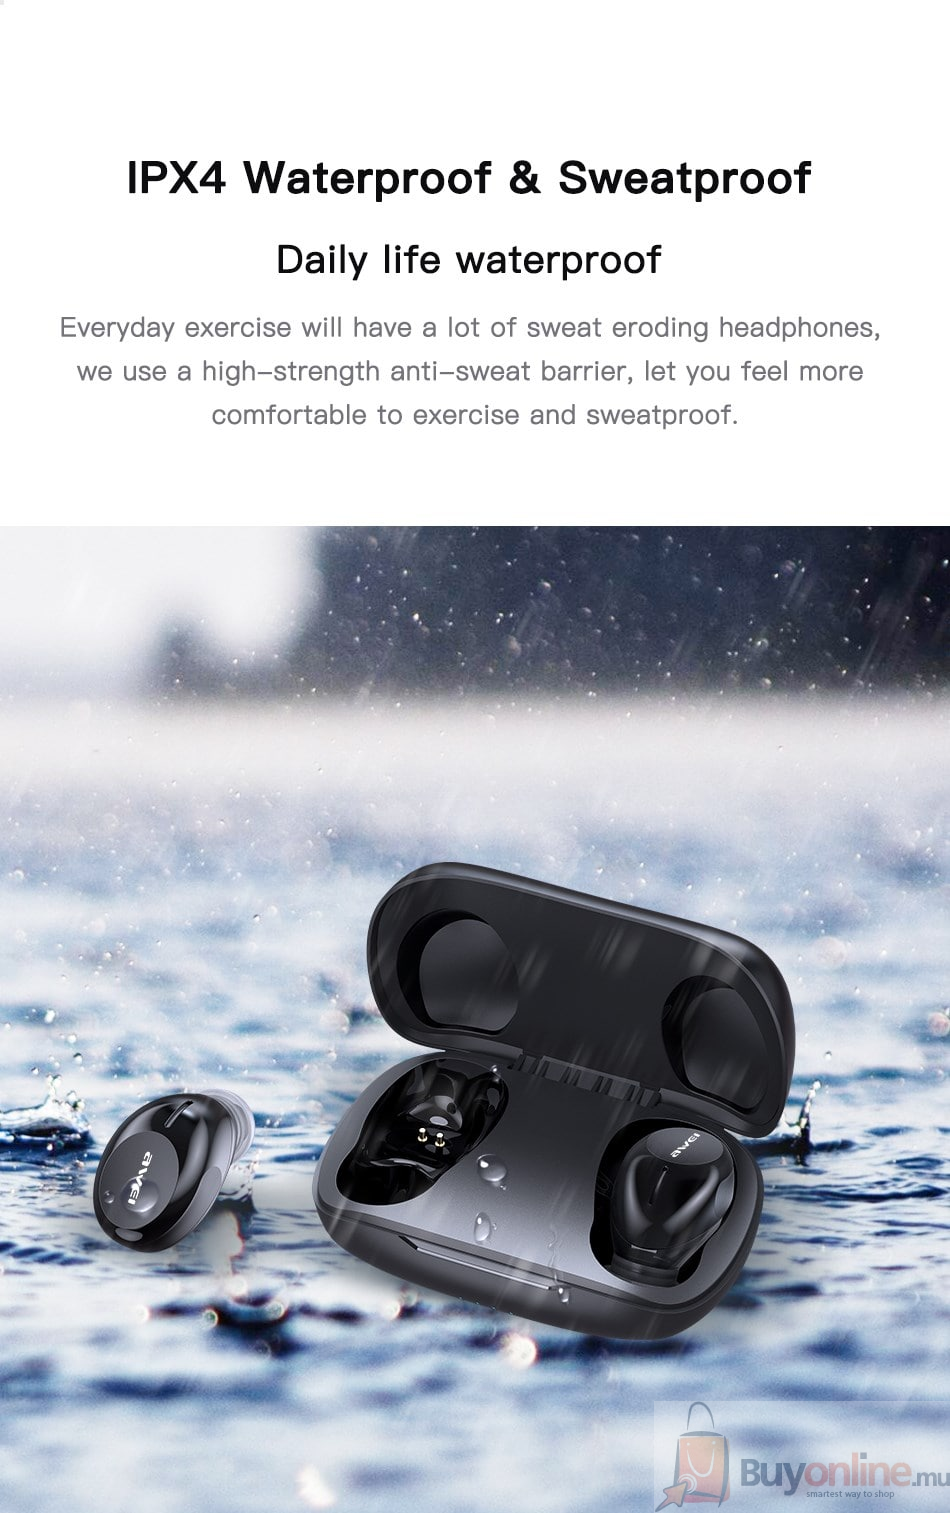 image 2022 01 23 223525 - Awei T20 Touch Water Resistant TWS Earphones with Microphone and Charging Base IPX4 Bluetooth 5.0 - BuyOnline.mu - Earbuds,Earphone,Earbud,T20,Awei